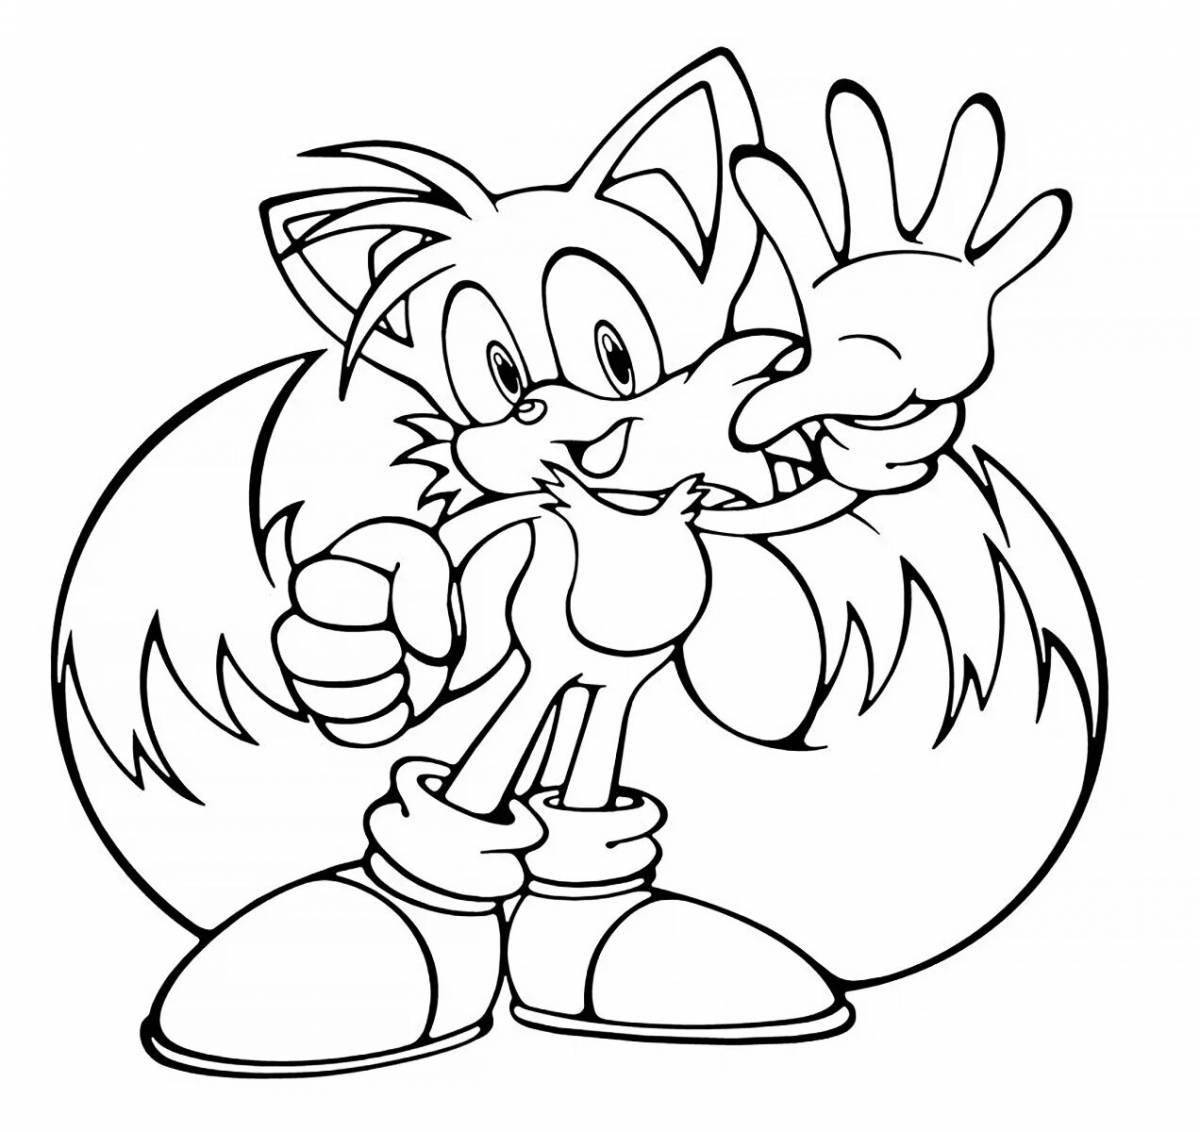 Exquisite sonic theos coloring book